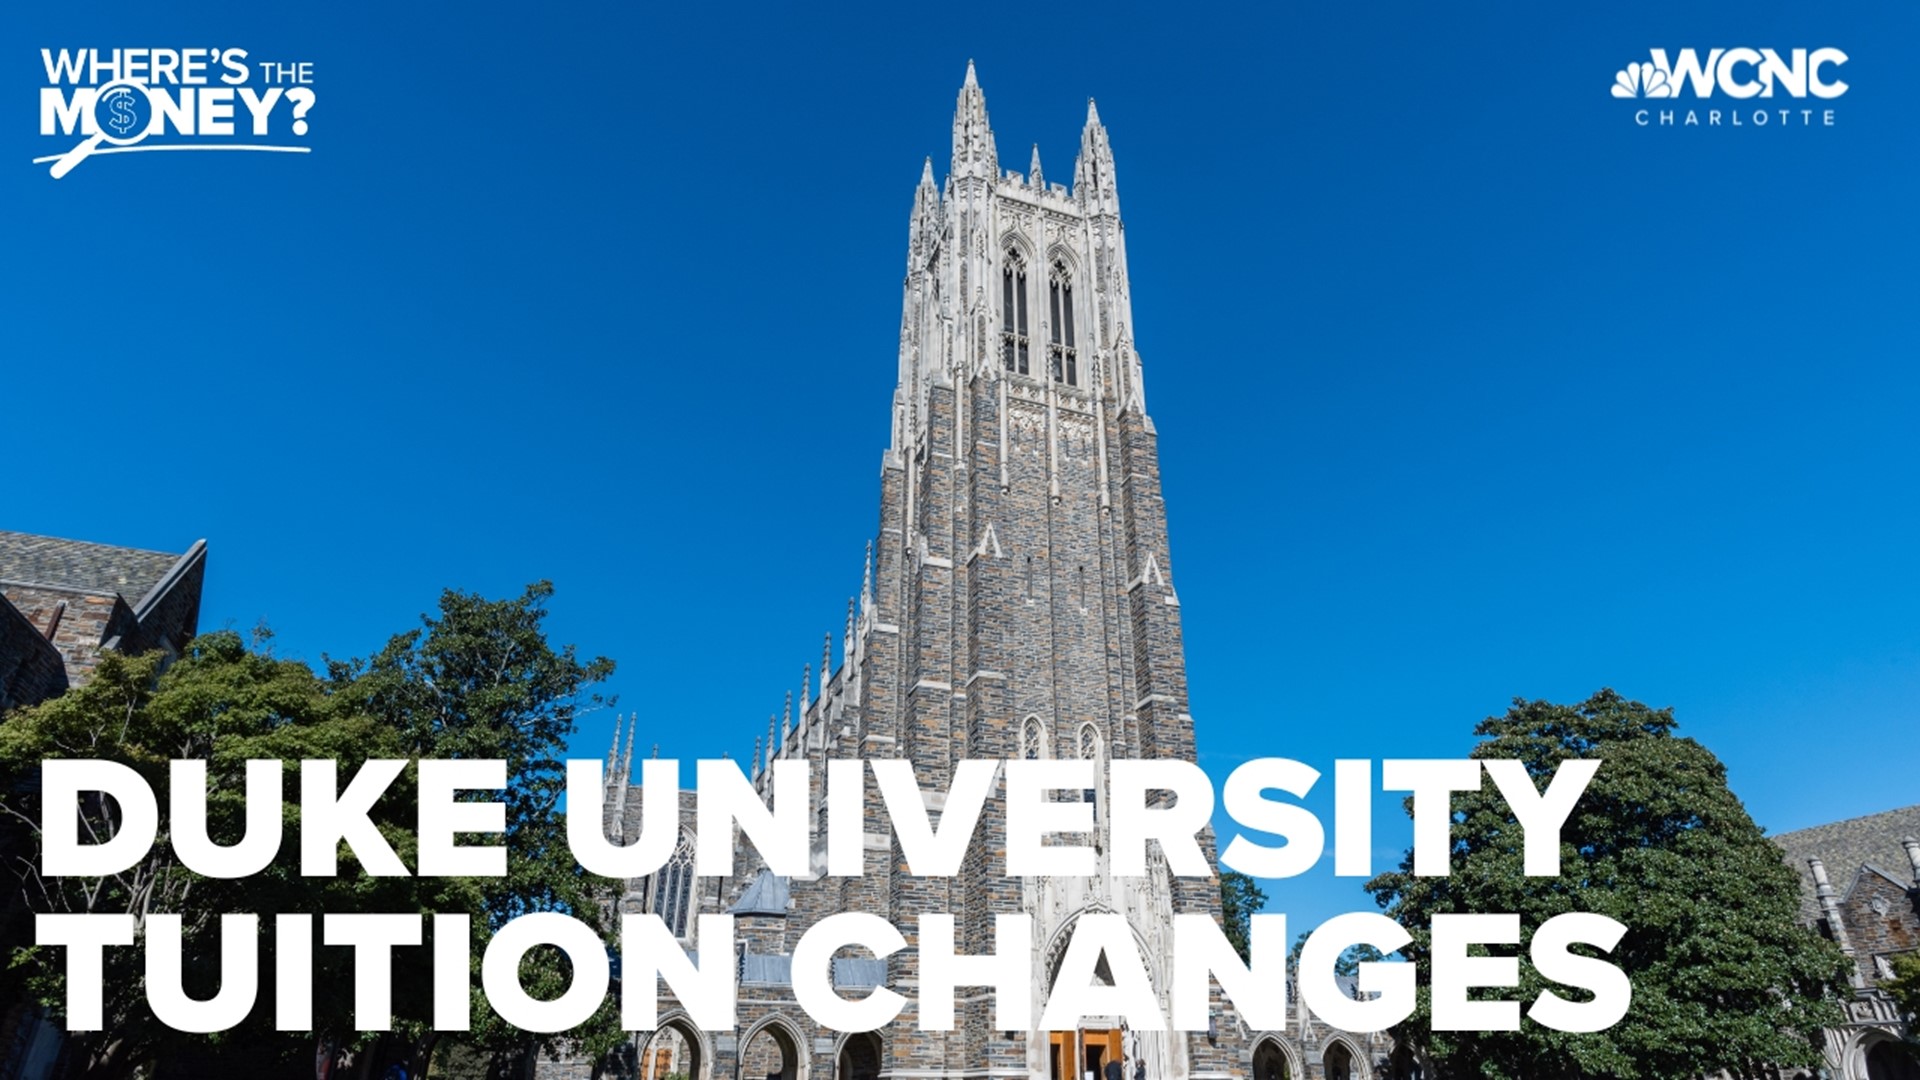 Duke University is adding $2 million towards their financial aid fund for families across the Carolinas earning less than $150K annually